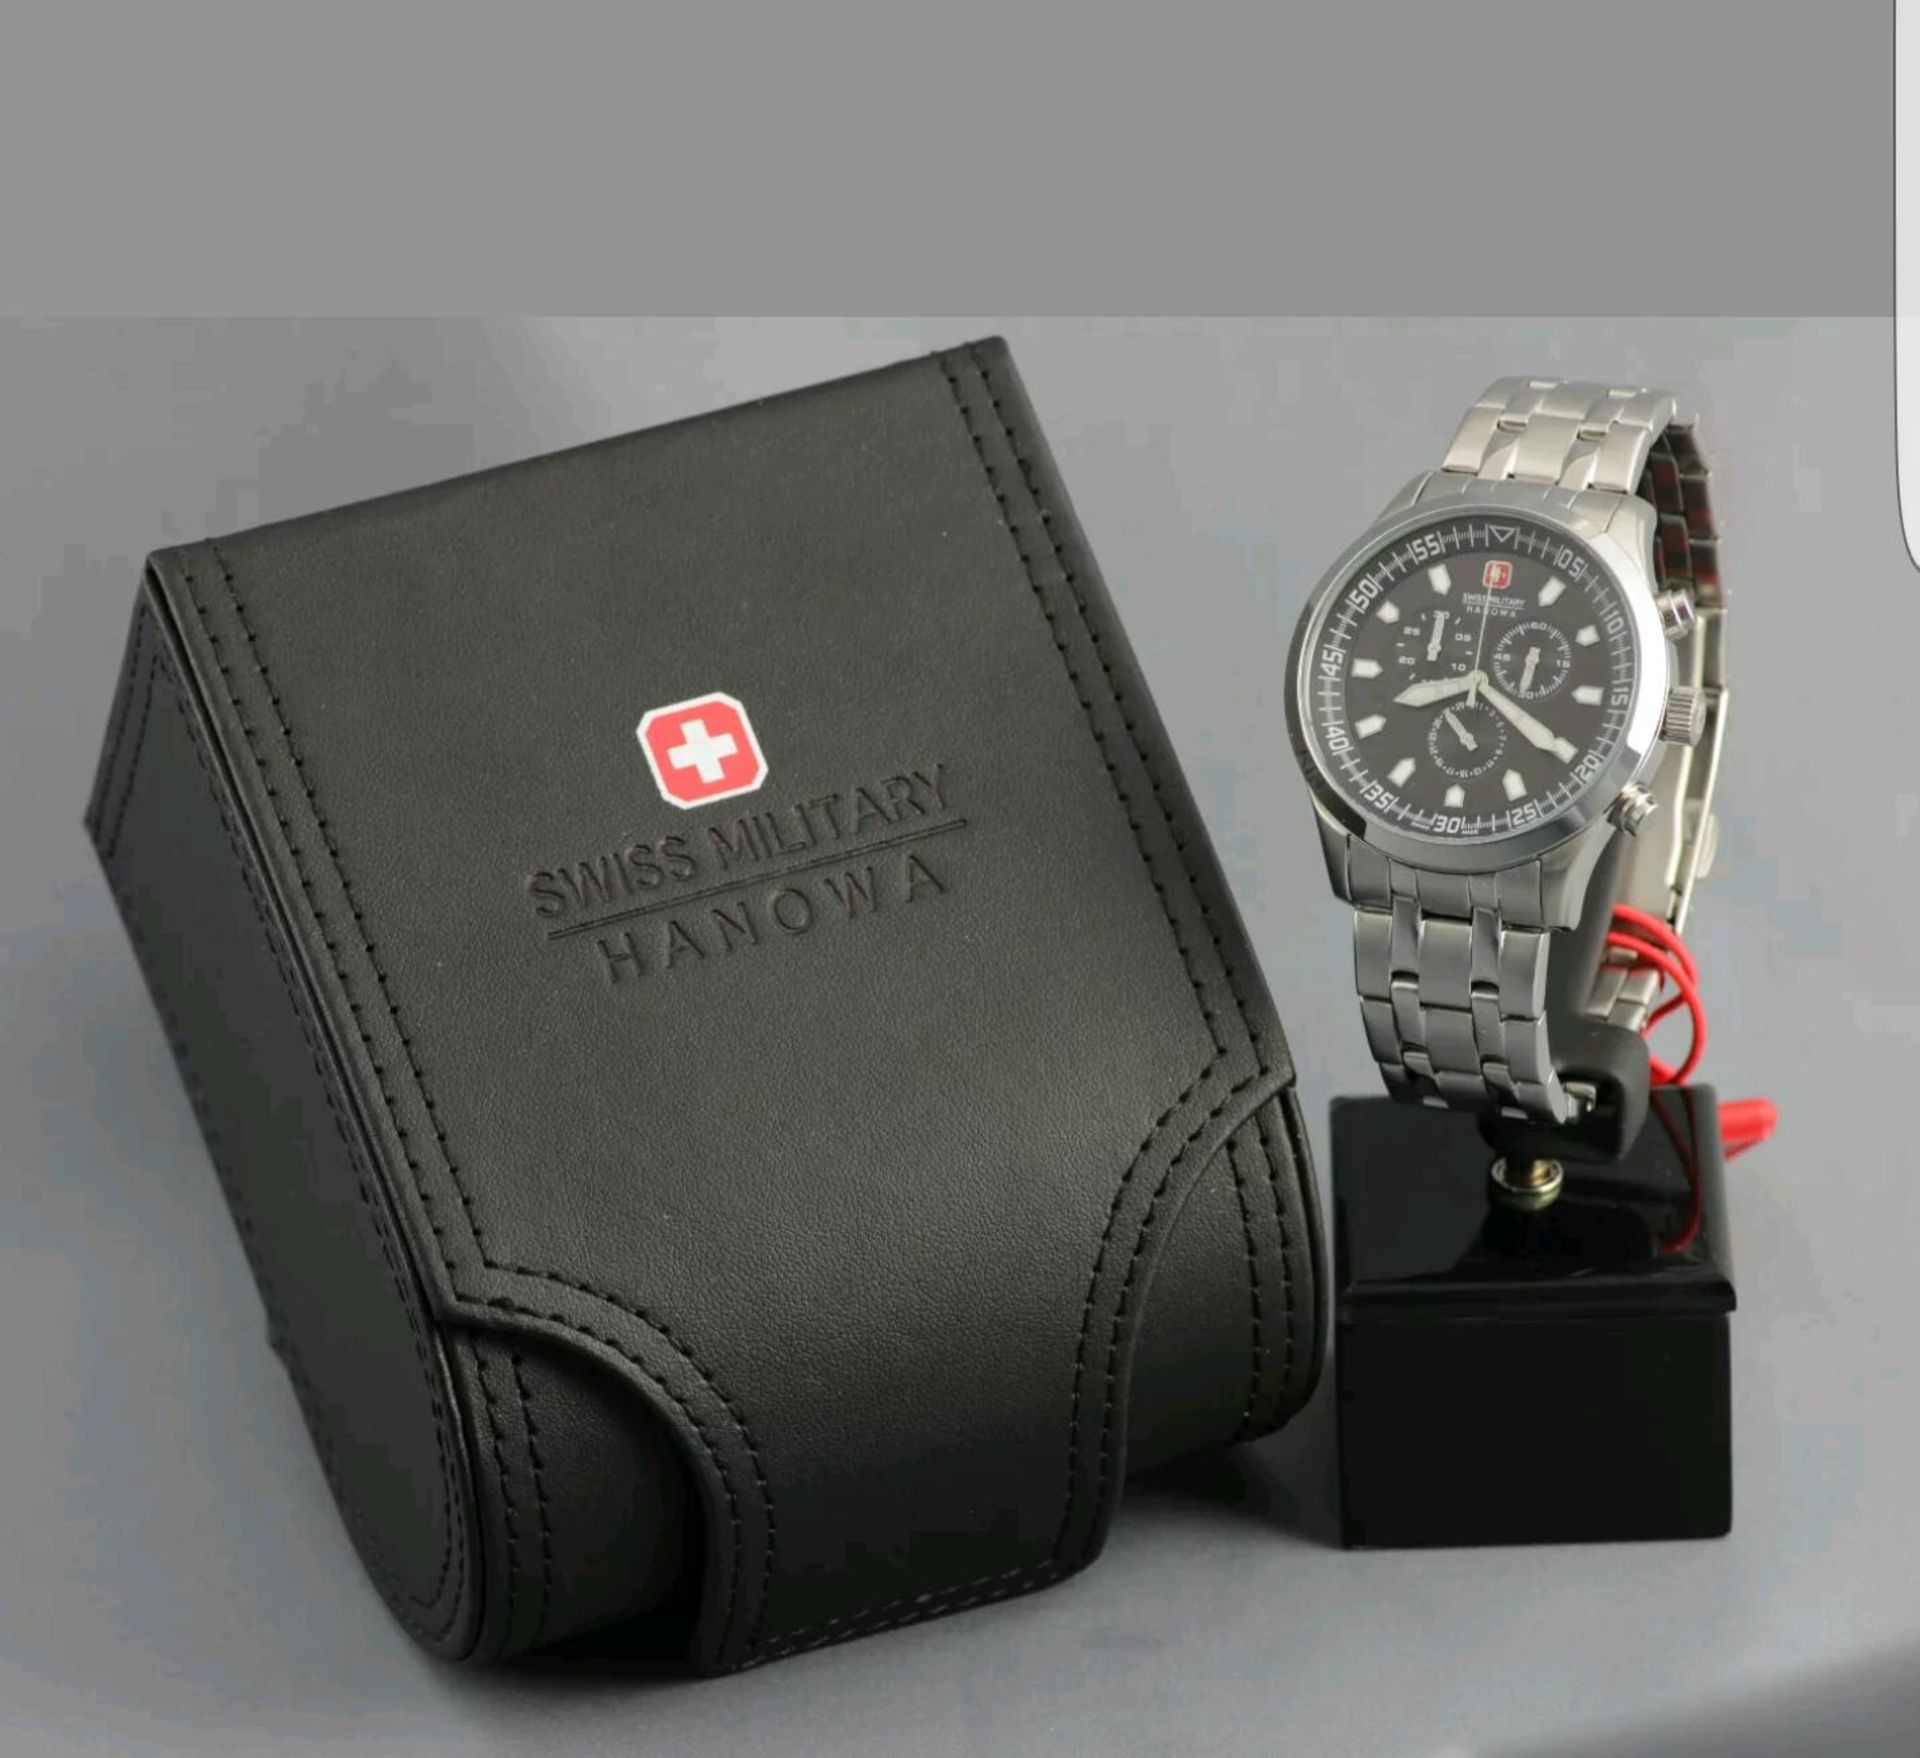 BRAND NEW SWISS MILITARY HANOWA GENTS WATCH 06-5264.04.007, COMPLETE WITH ORIGINAL BOX AND PAPERS, 2 - Image 2 of 2